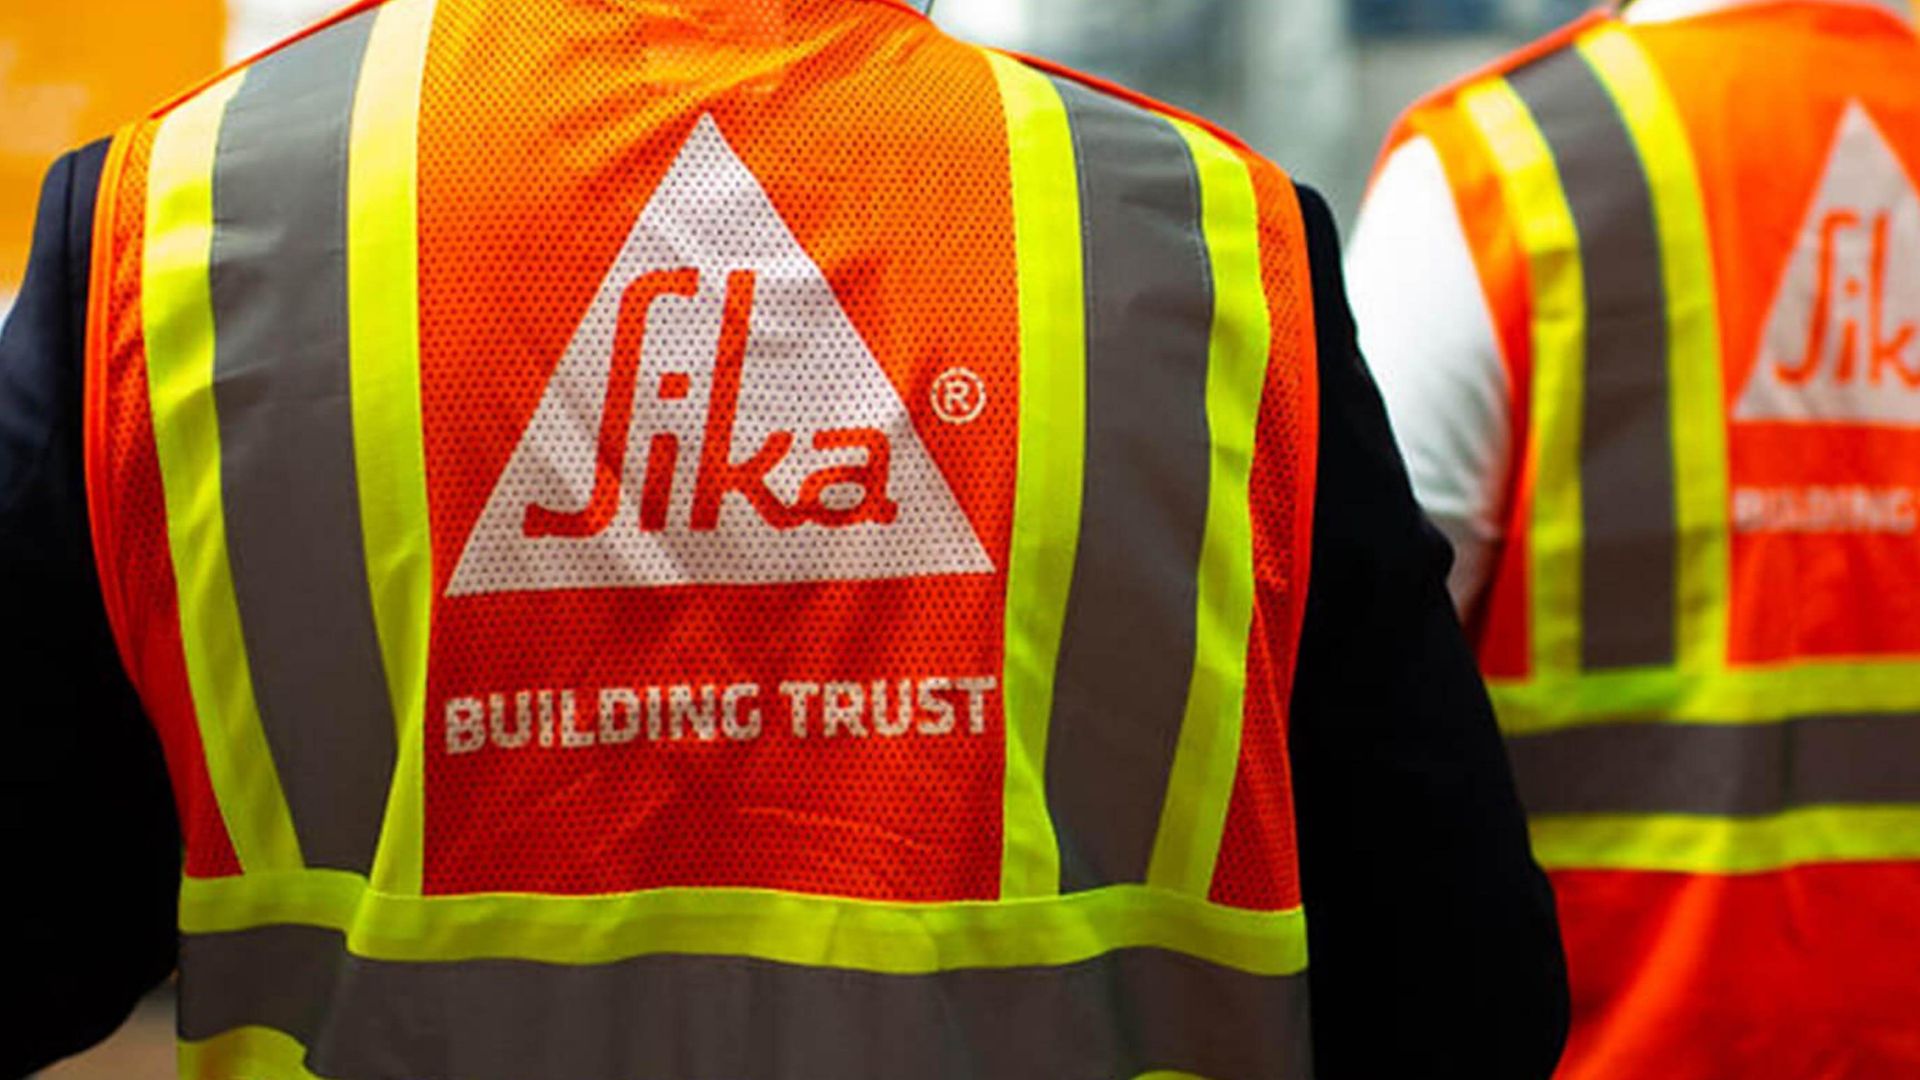 SIKA ACQUIRES STRONG PLAYER IN US MINING INDUSTRY